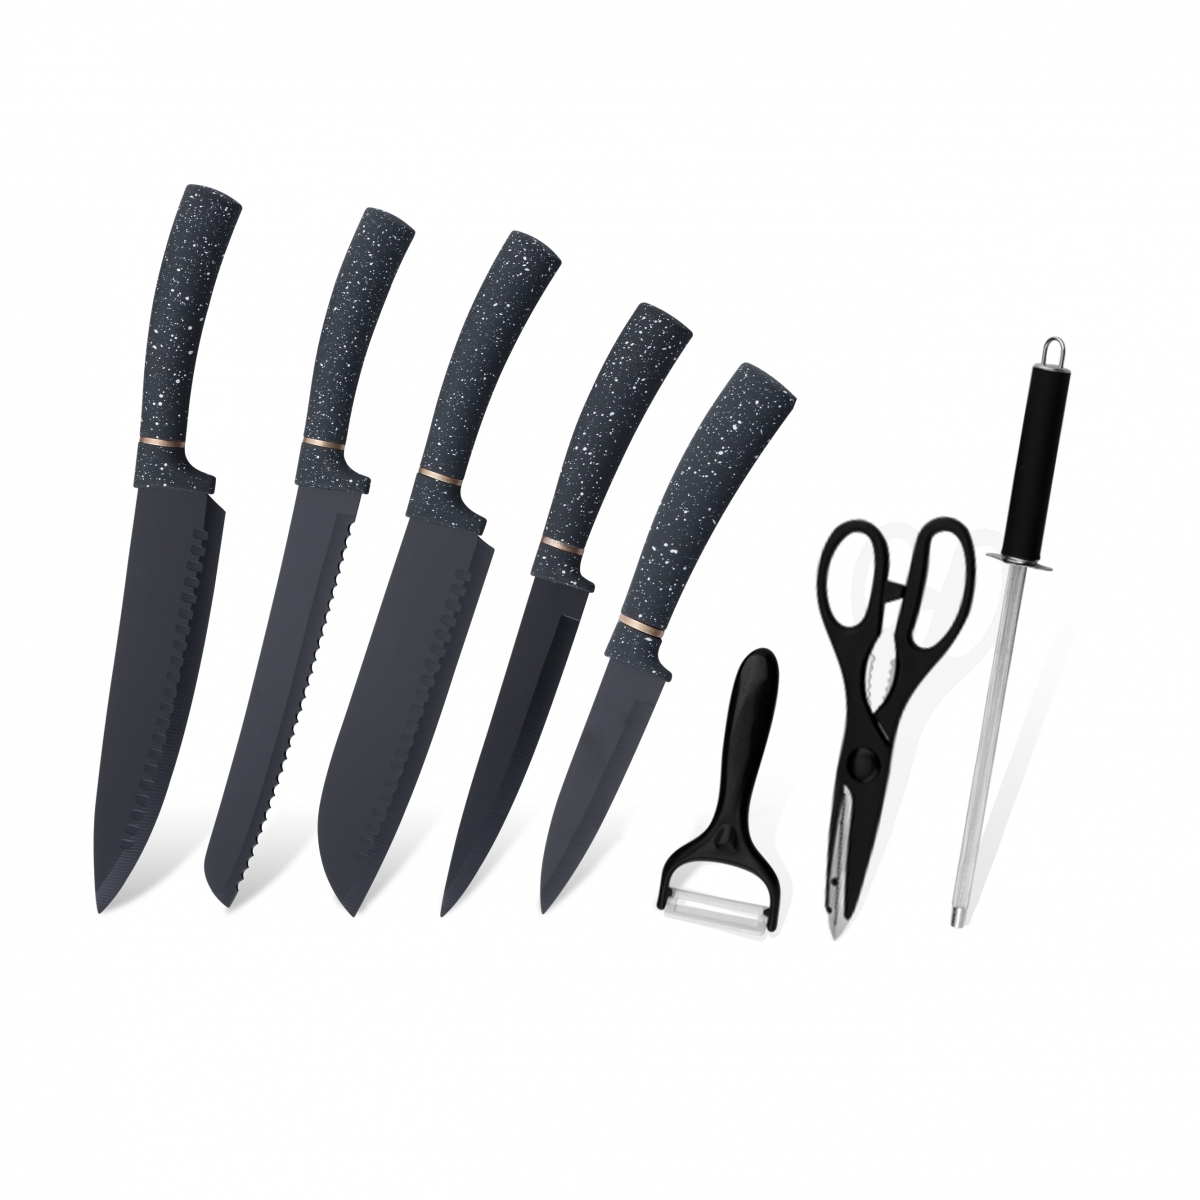 K125-High Quality Stainless Steel Chef Knife Kitchen Knife Set-ZX | kitchen knife,Kitchen tools,Silicone Cake Mould,Cutting Board,Baking Tool Sets,Chef Knife,Steak Knife,Slicer knife,Utility Knife,Paring Knife,Knife block,Knife Stand,Santoku Knife,toddler Knife,Plastic Knife,Non Stick Painting Knife,Colorful Knife,Stainless Steel Knife,Can opener,bottle Opener,Tea Strainer,Grater,Egg Beater,Nylon Kitchen tool,Silicone Kitchen Tool,Cookie Cutter,Cooking Knife Set,Knife Sharpener,Peeler,Cake Knife,Cheese Knife,Pizza Knife,Silicone Spatular,Silicone Spoon,Food Tong,Forged knife,Kitchen Scissors,cake baking knives,Children’s Cooking knives,Carving Knife